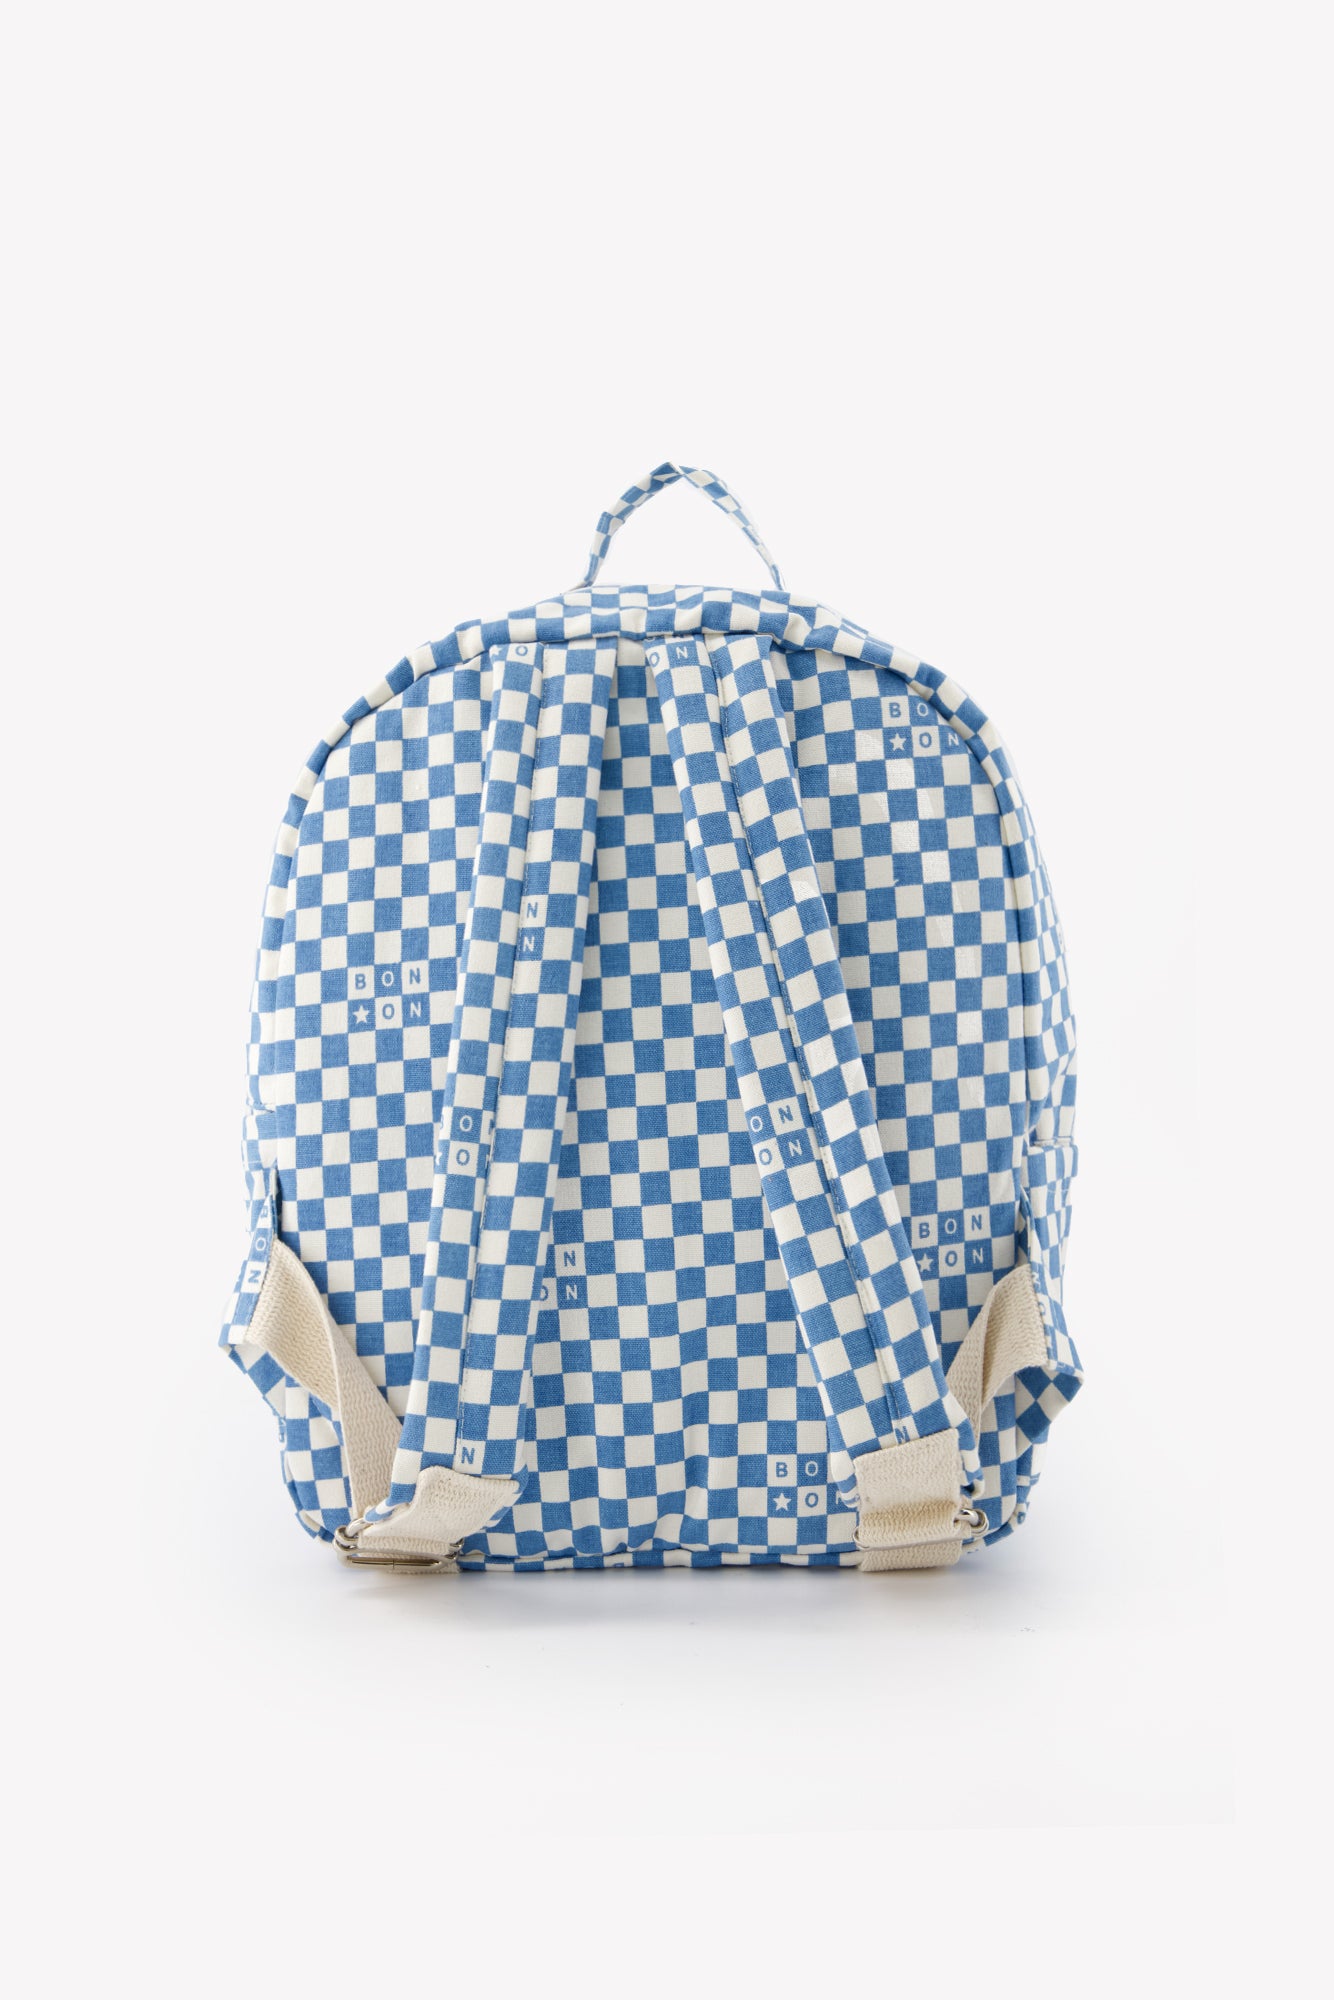 Backpack - Semi -starry checkerboard